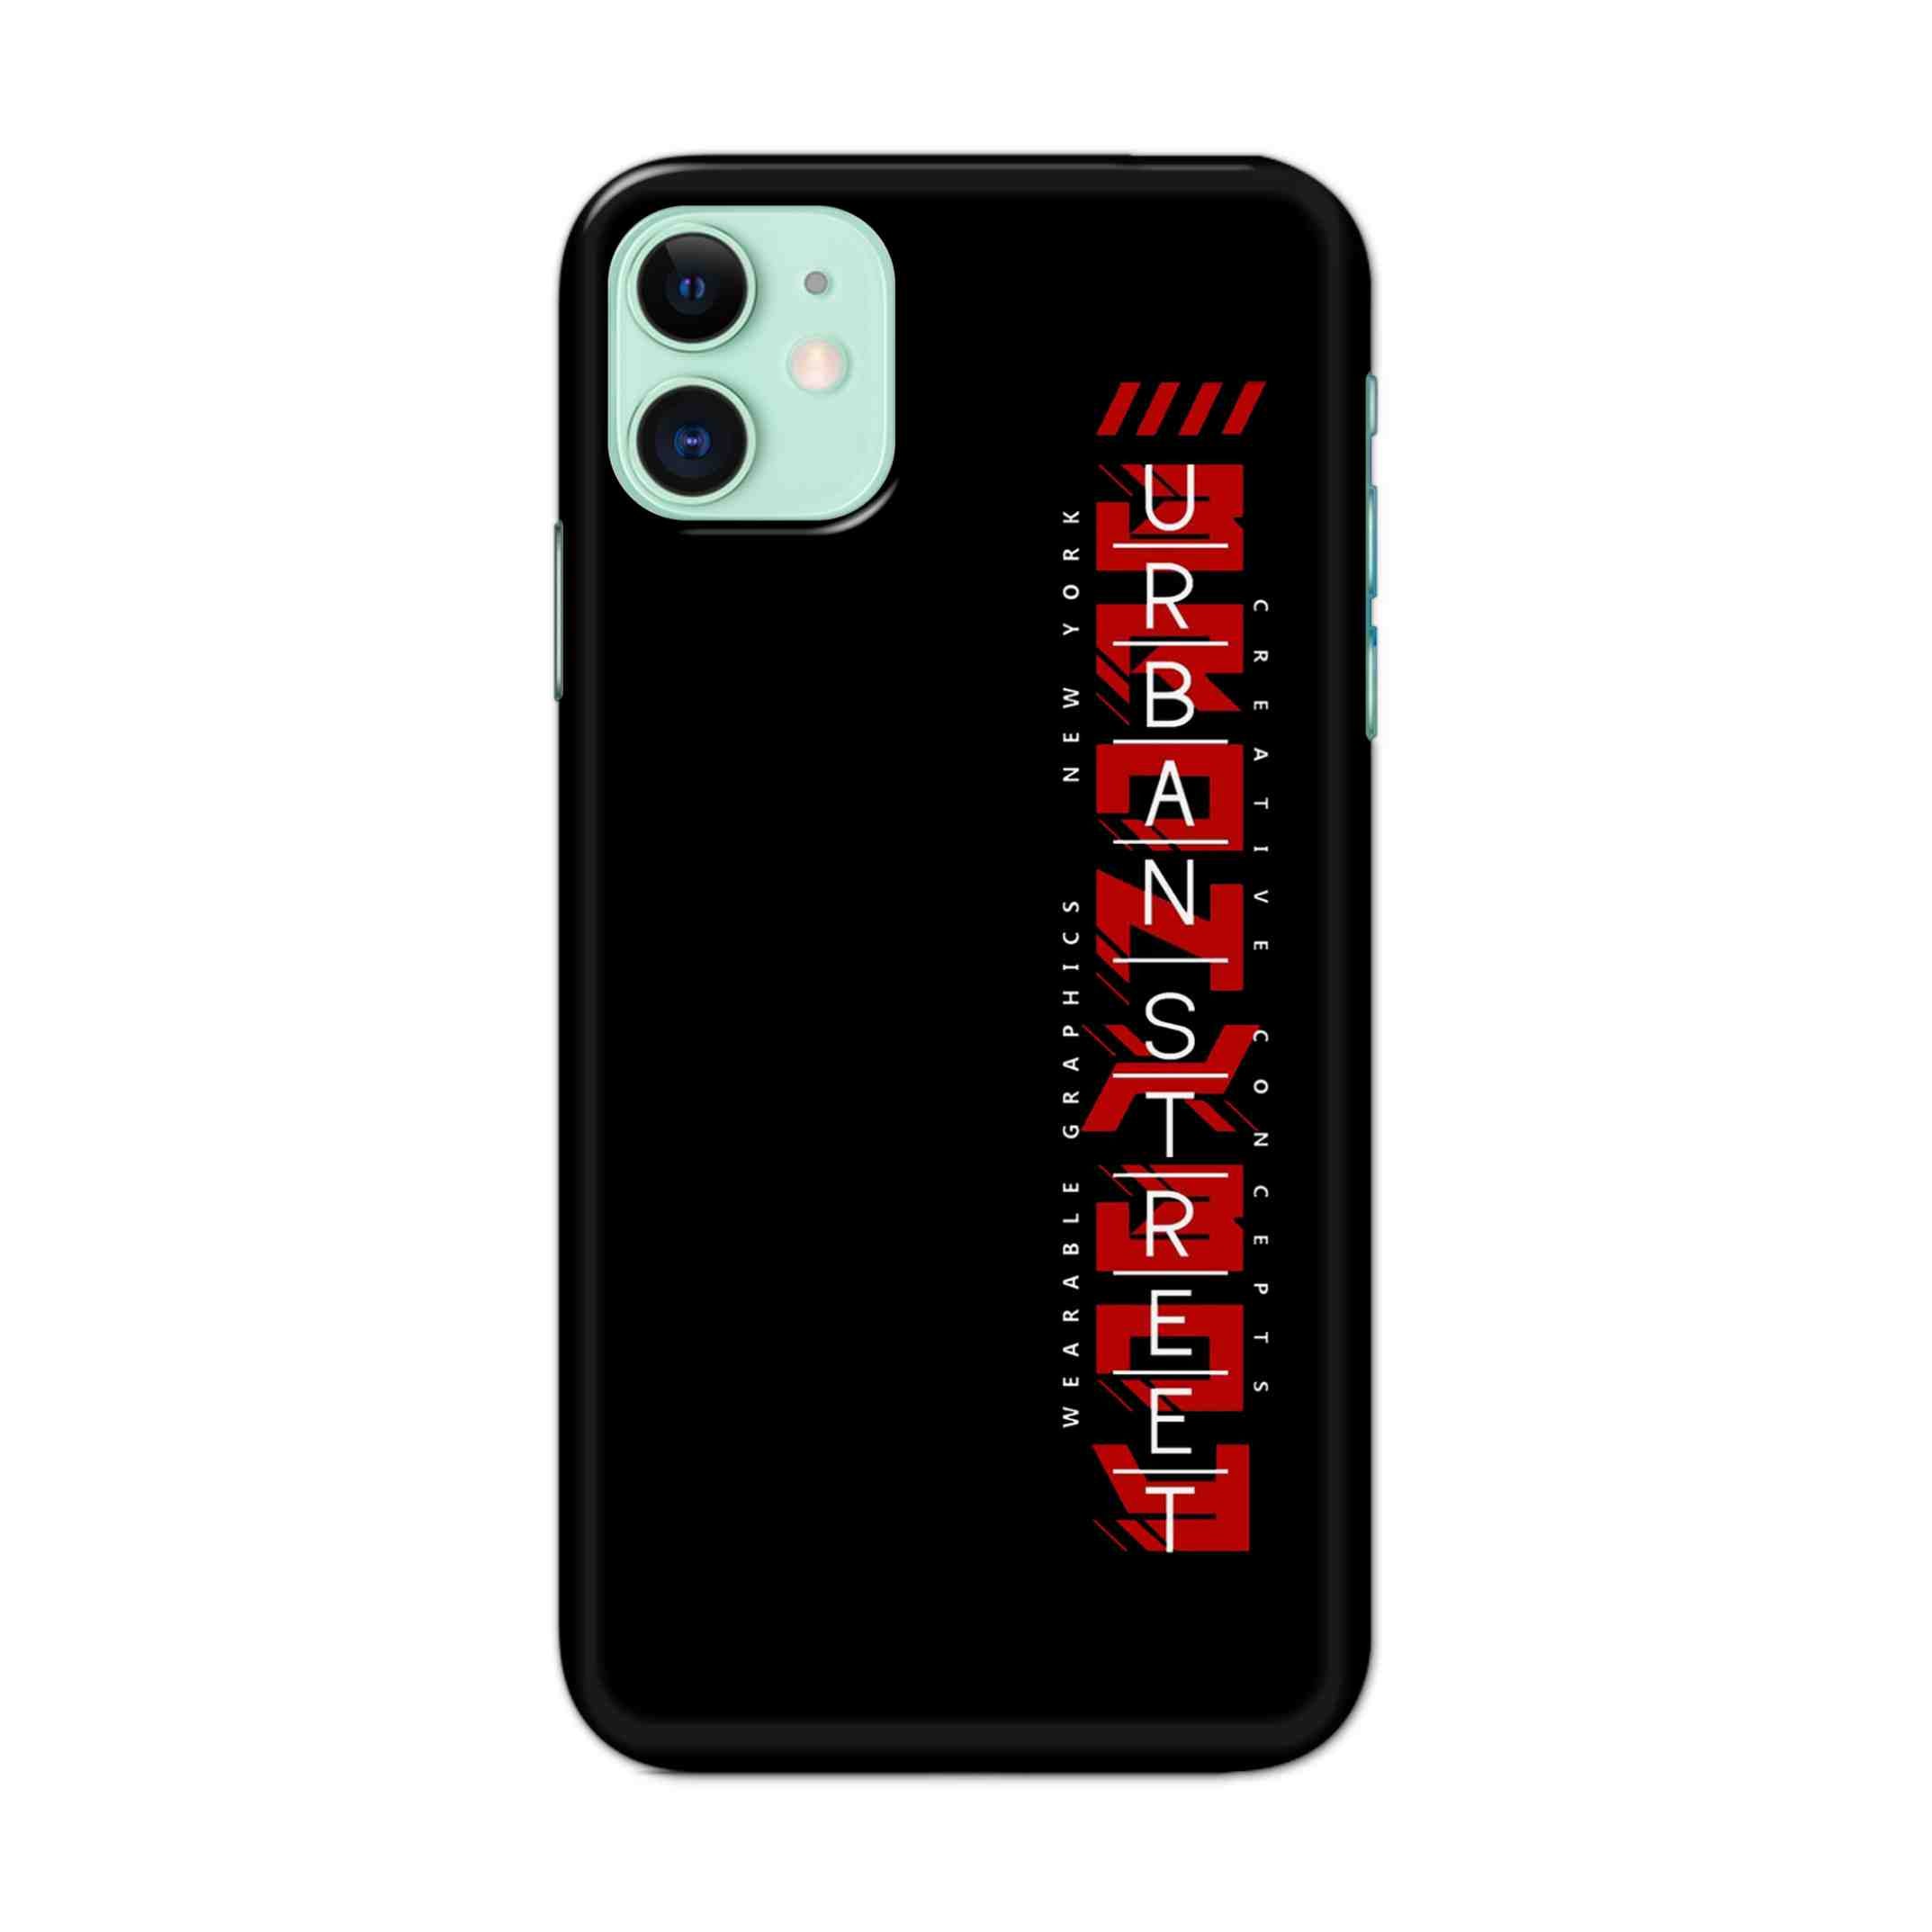 Buy Urban Street Hard Back Mobile Phone Case/Cover For iPhone 11 Online